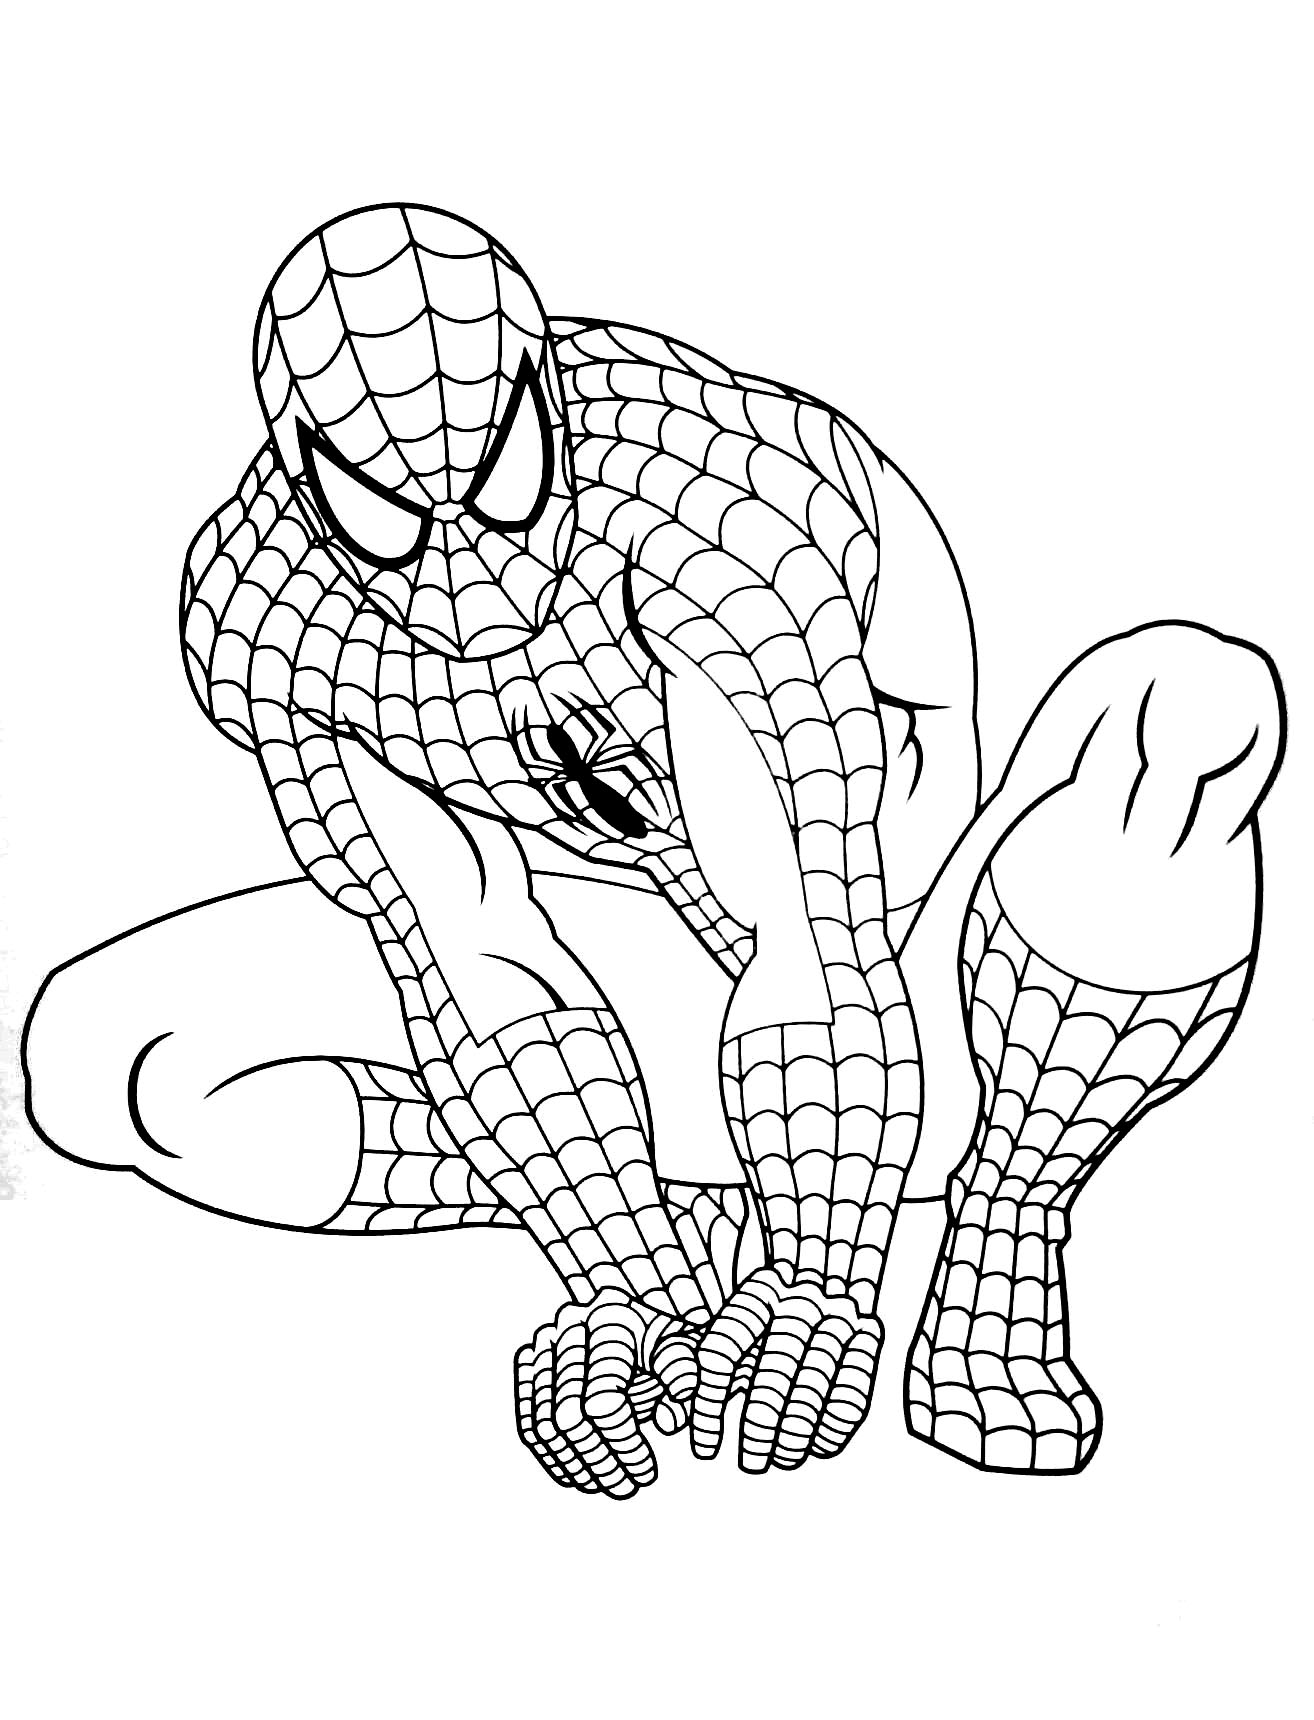 spiderman-coloring-pages-to-print-for-kids-spiderman-kids-coloring-pages